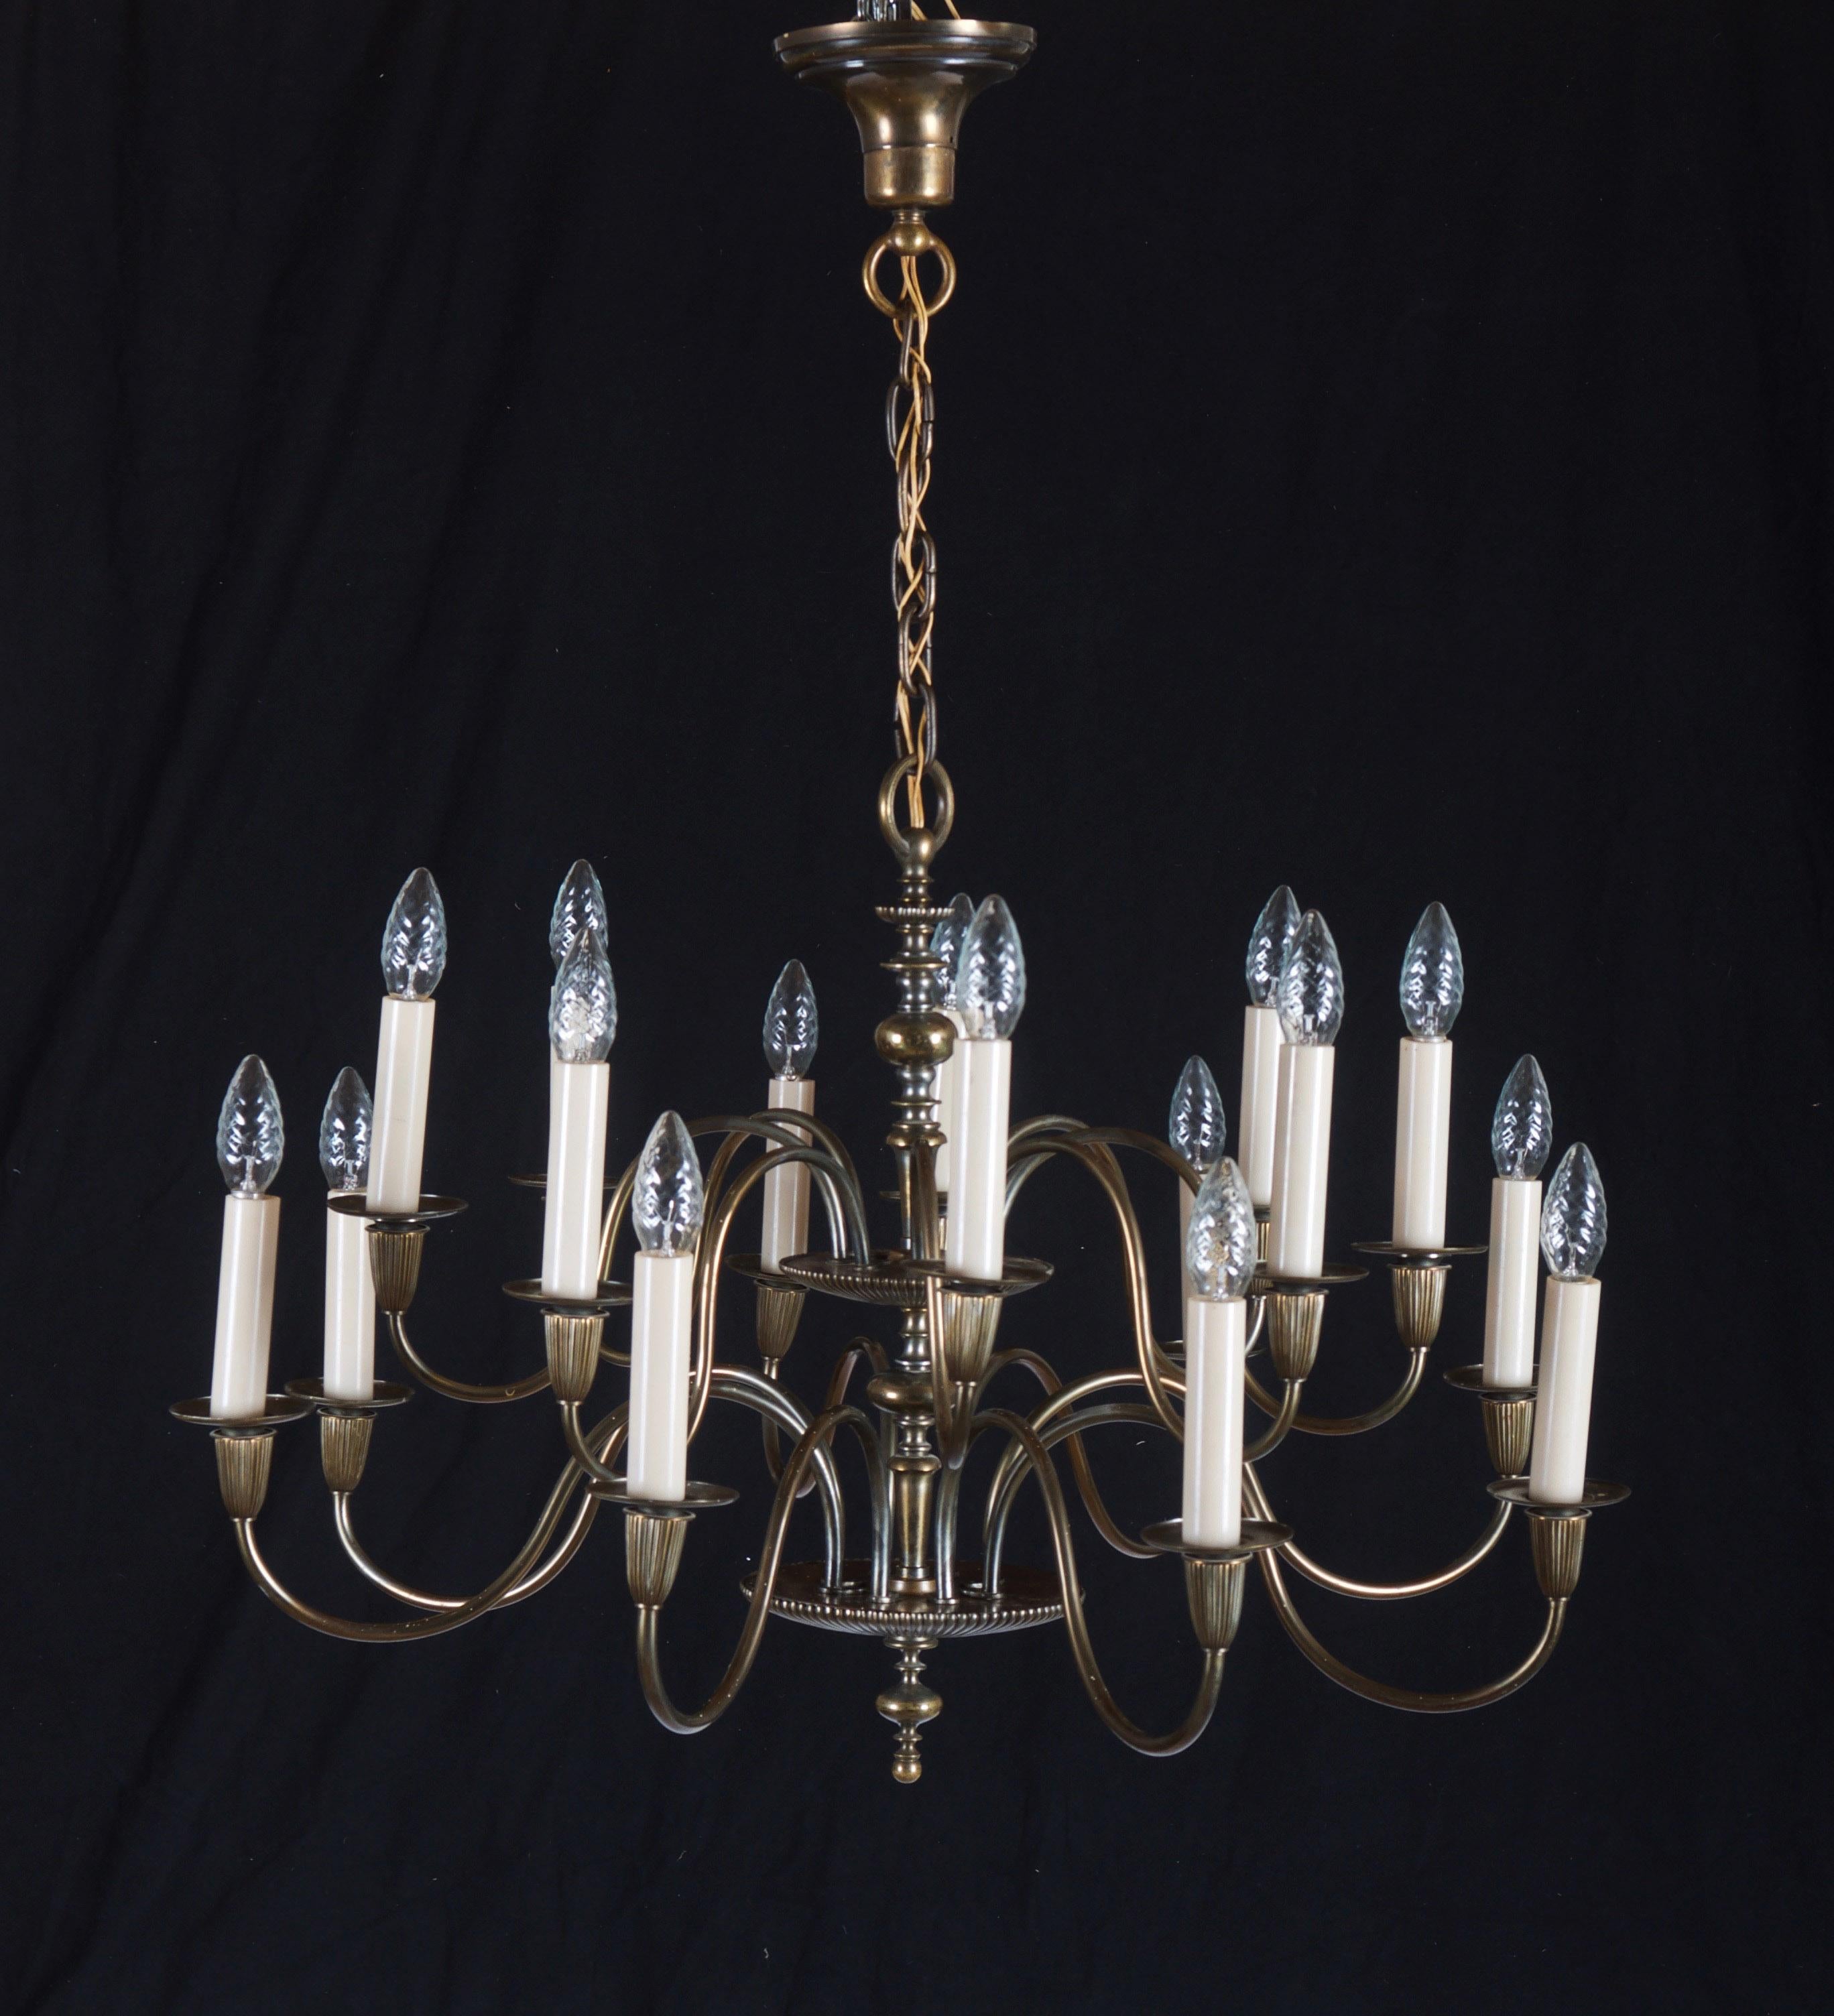 Chandelier in the style of a Flemish shank chandelier, made in the middle of the 20th century in Sweden, brass, sixteen arms, S-shaped curved arms fitted with E14 sockets.

 